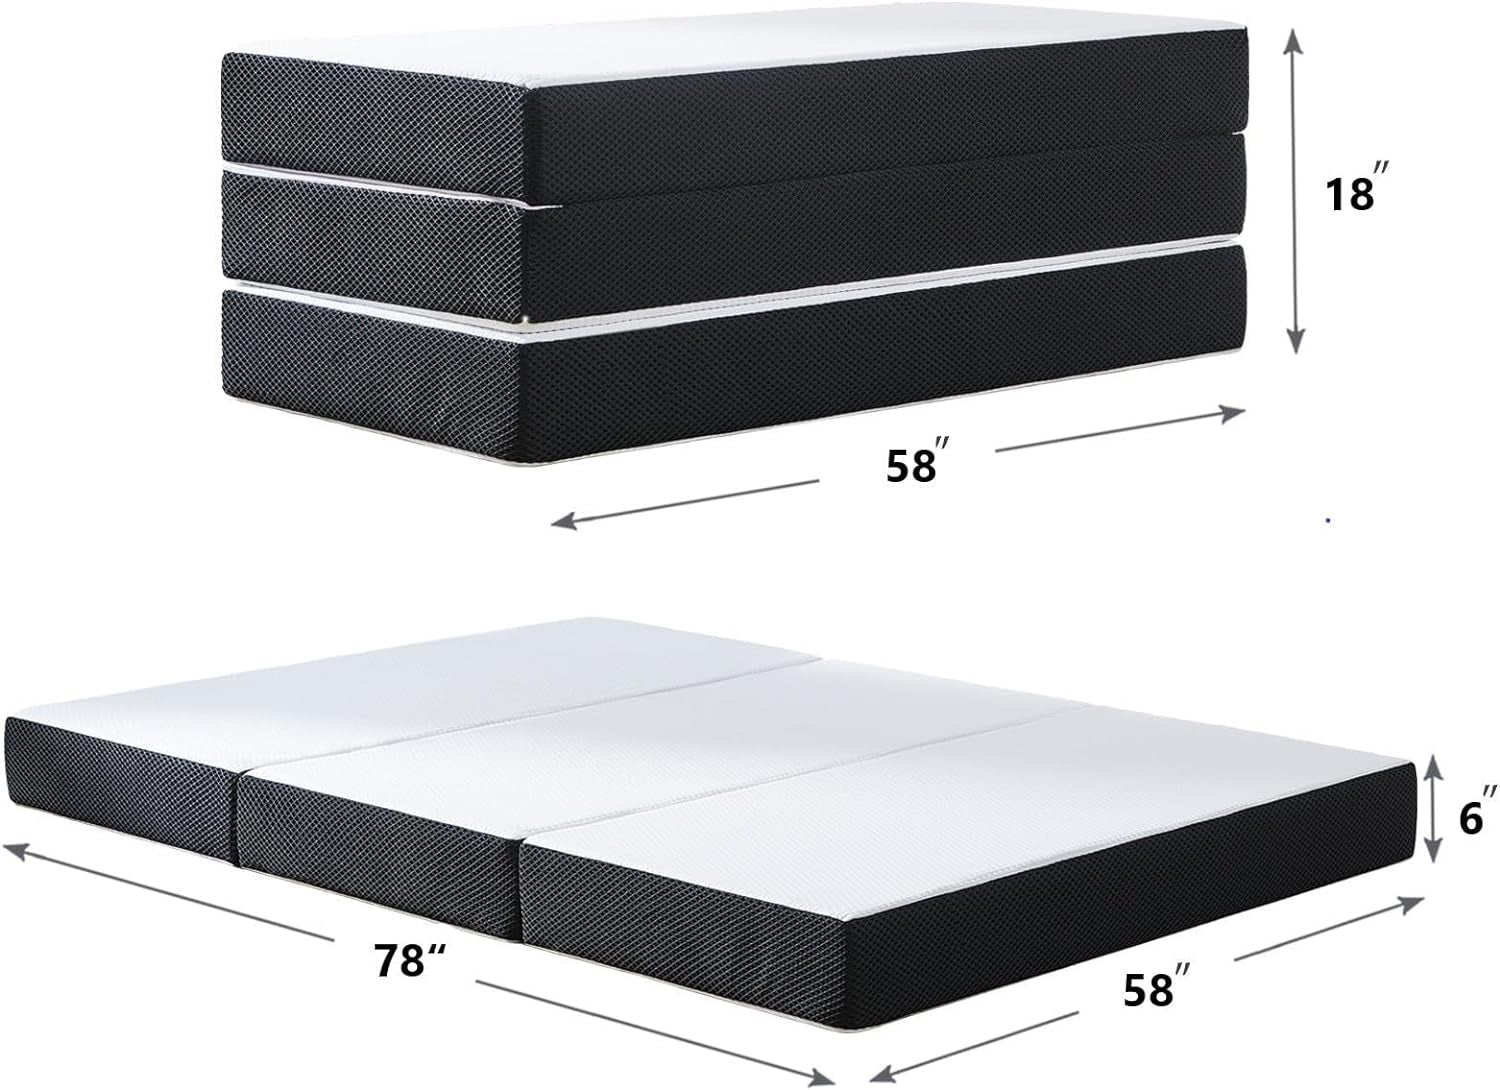 Foldable Mattress,6 Inch Queen Mattress,Tri-Fold Memory Foam Mattress Topper,Folding Mattress with Washable Cover,Topper for Camping, Guest - Queen Size, 78"" X 58"" X 6""